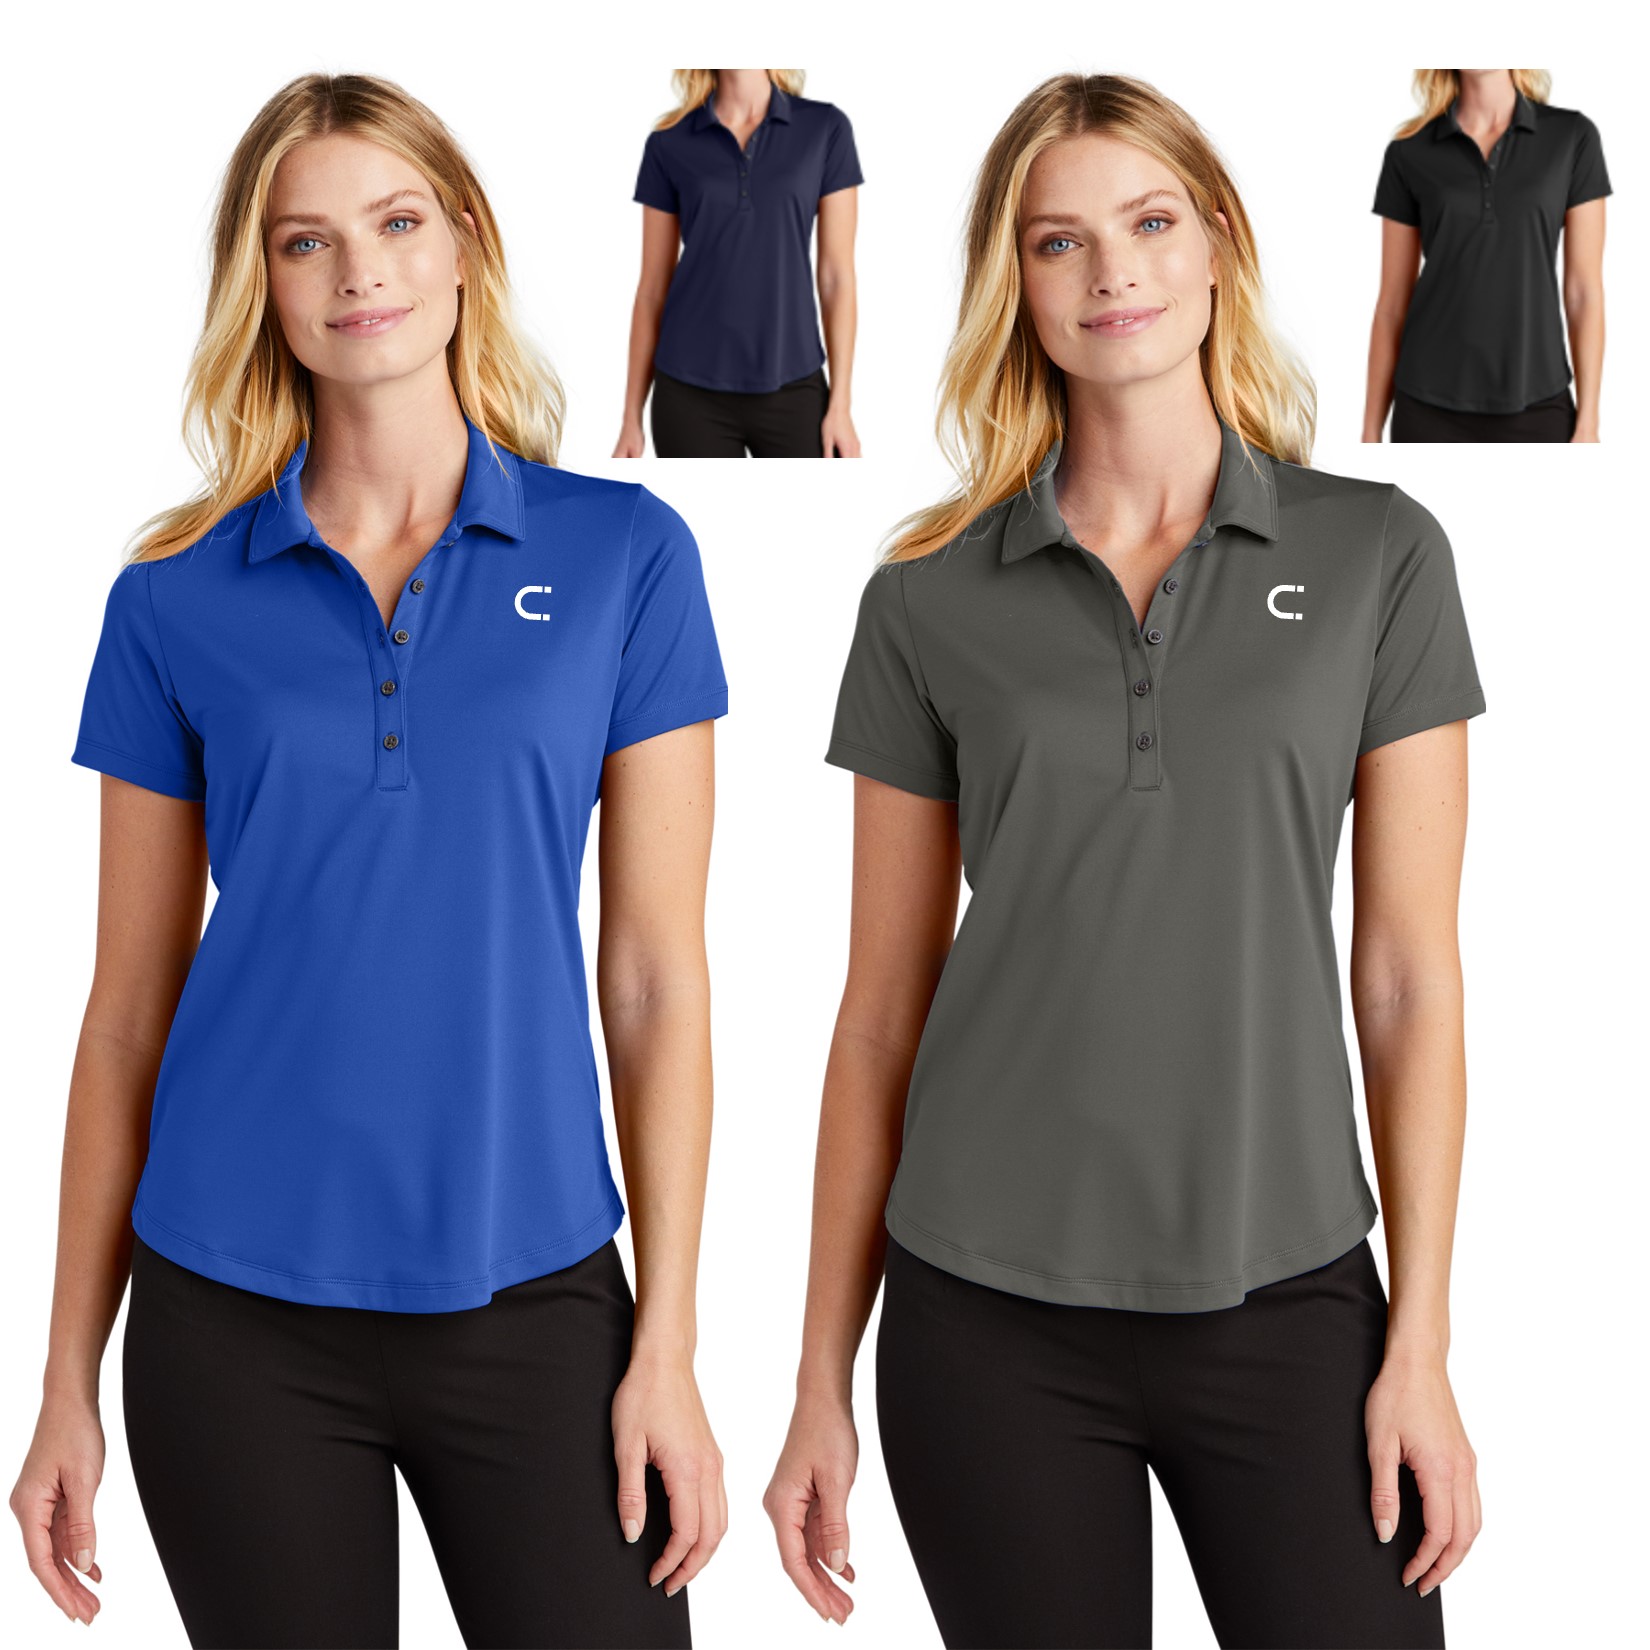 Women's Recycled carbon free sustainable custom embroidered polo